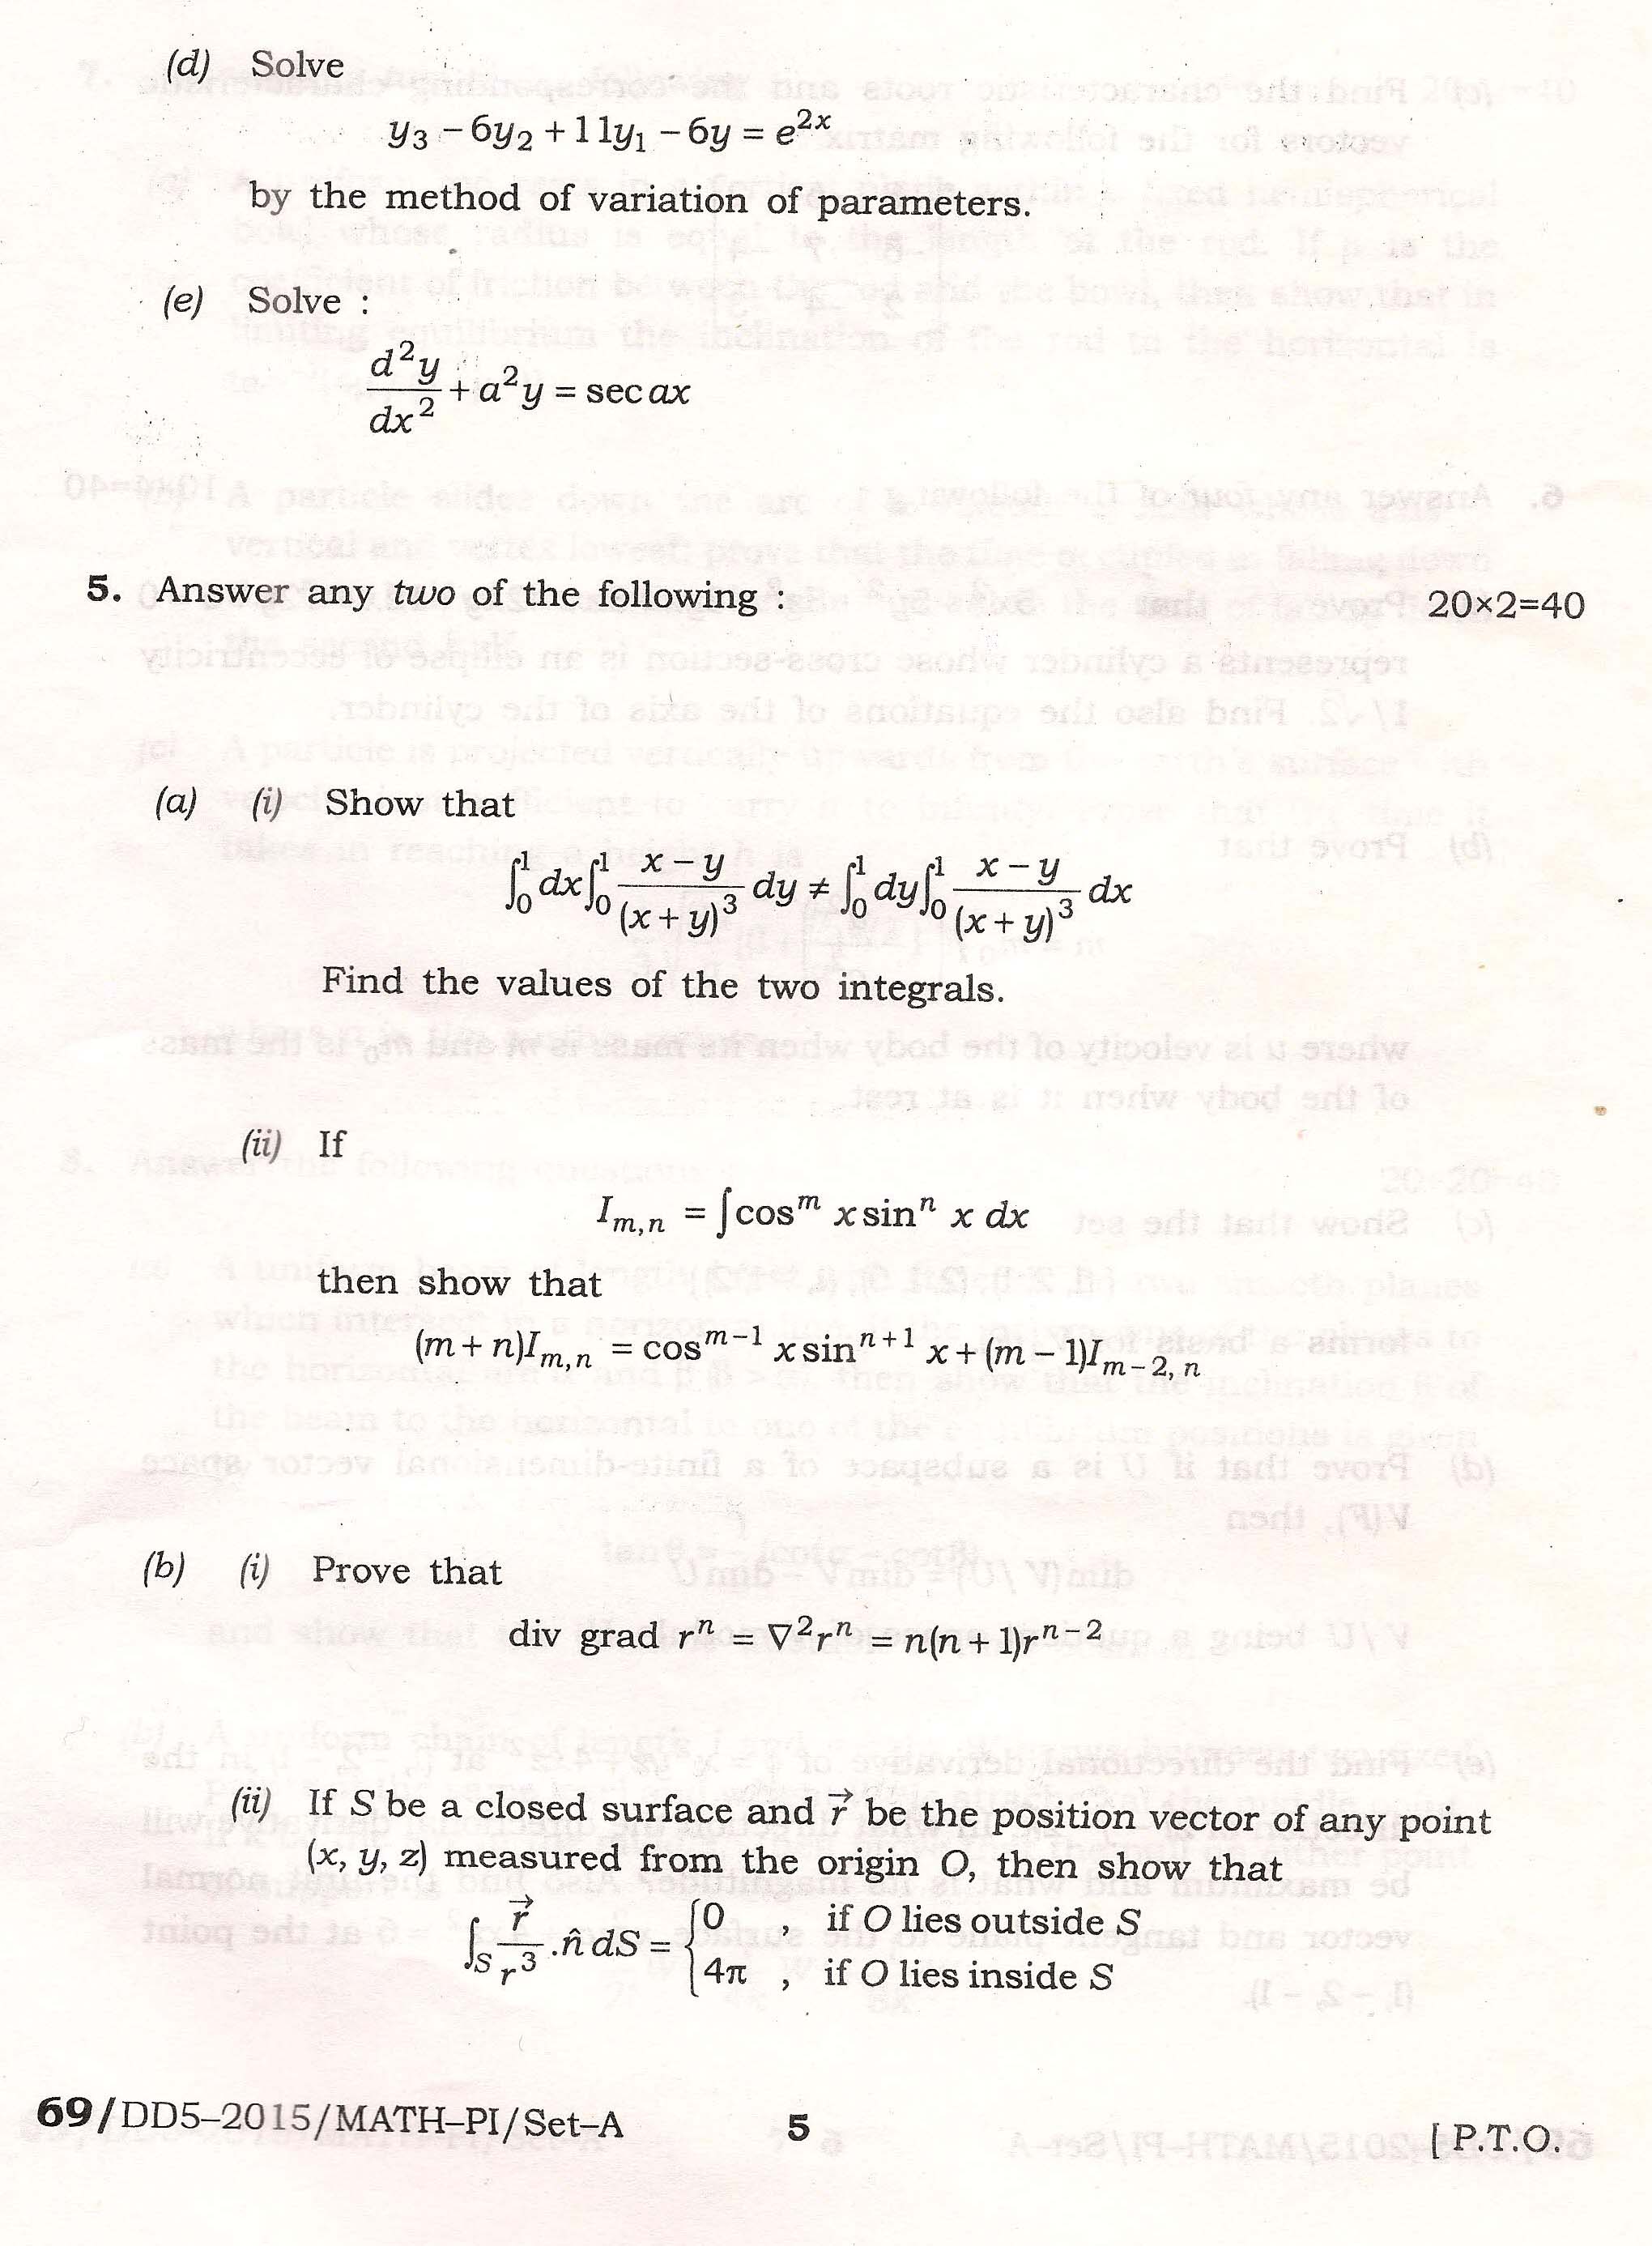 APPSC Combined Competitive Main Exam 2015 Mathematics Paper I 5